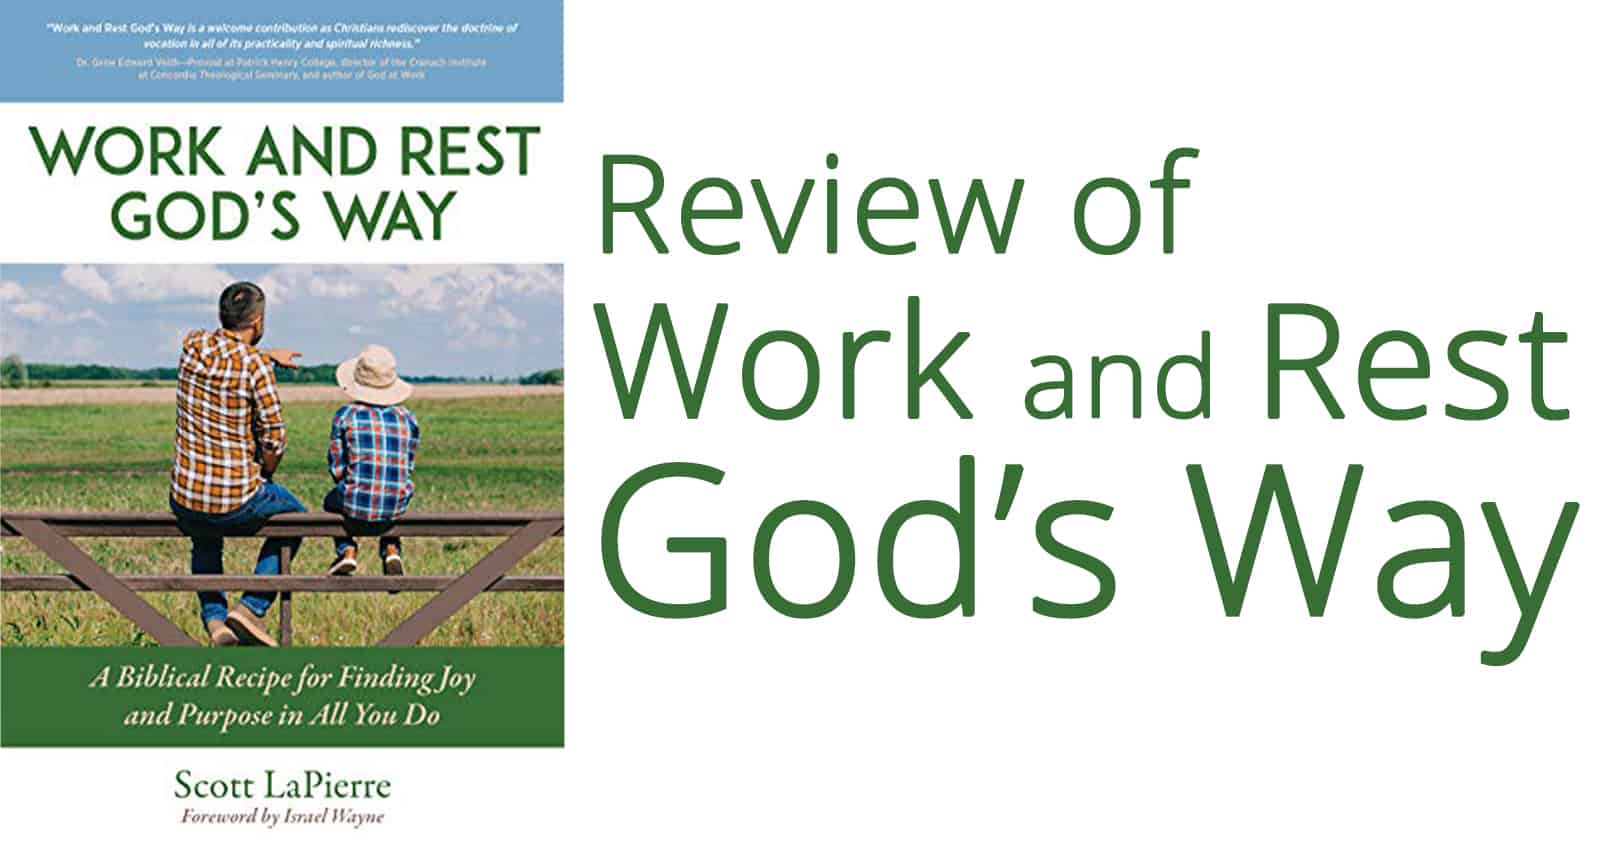 Review of Work and Rest God’s Way